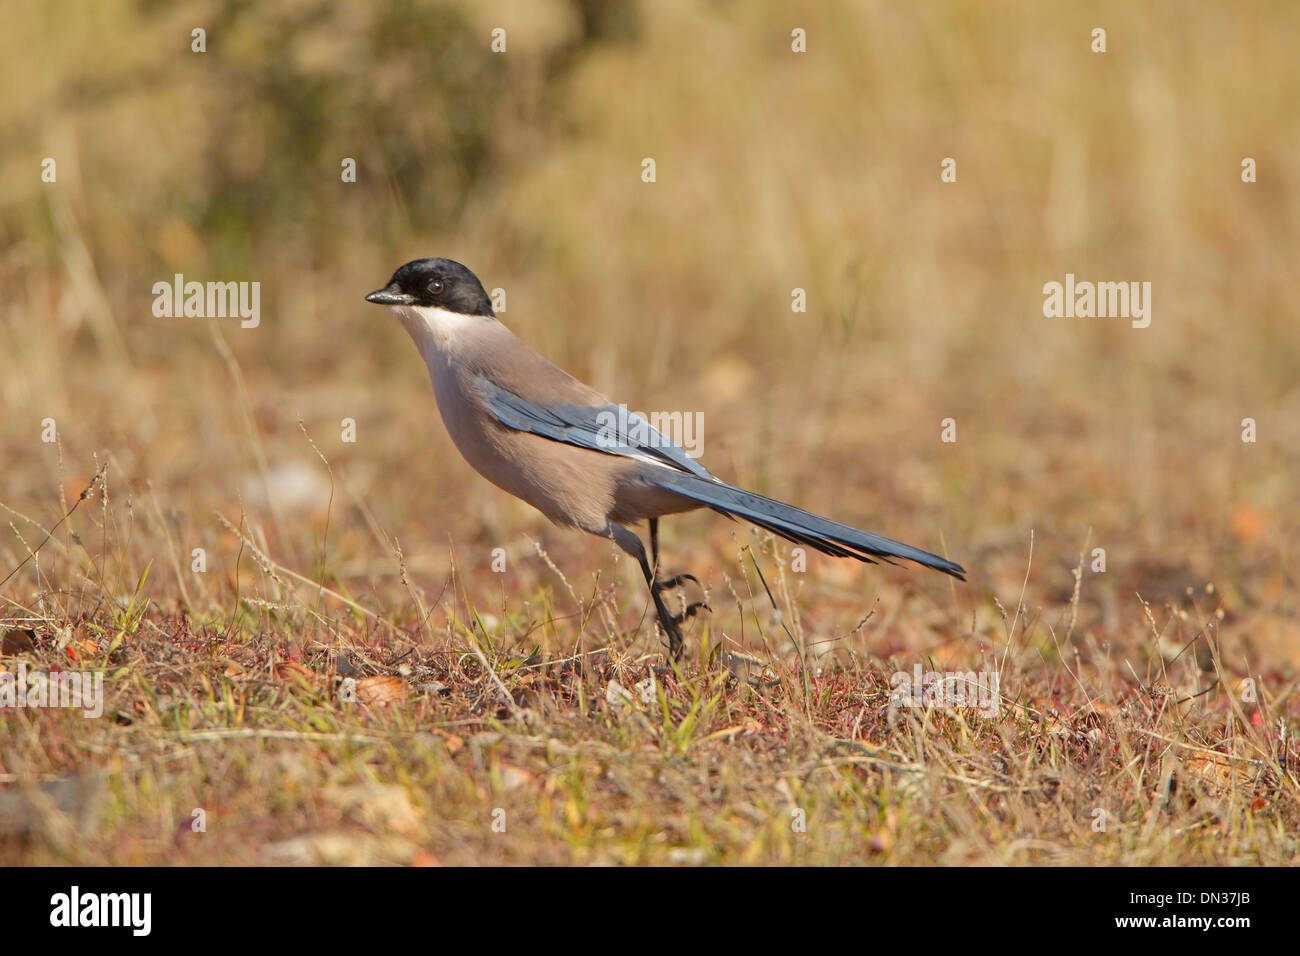 Azure-winged Magpie taking off Stock Photo